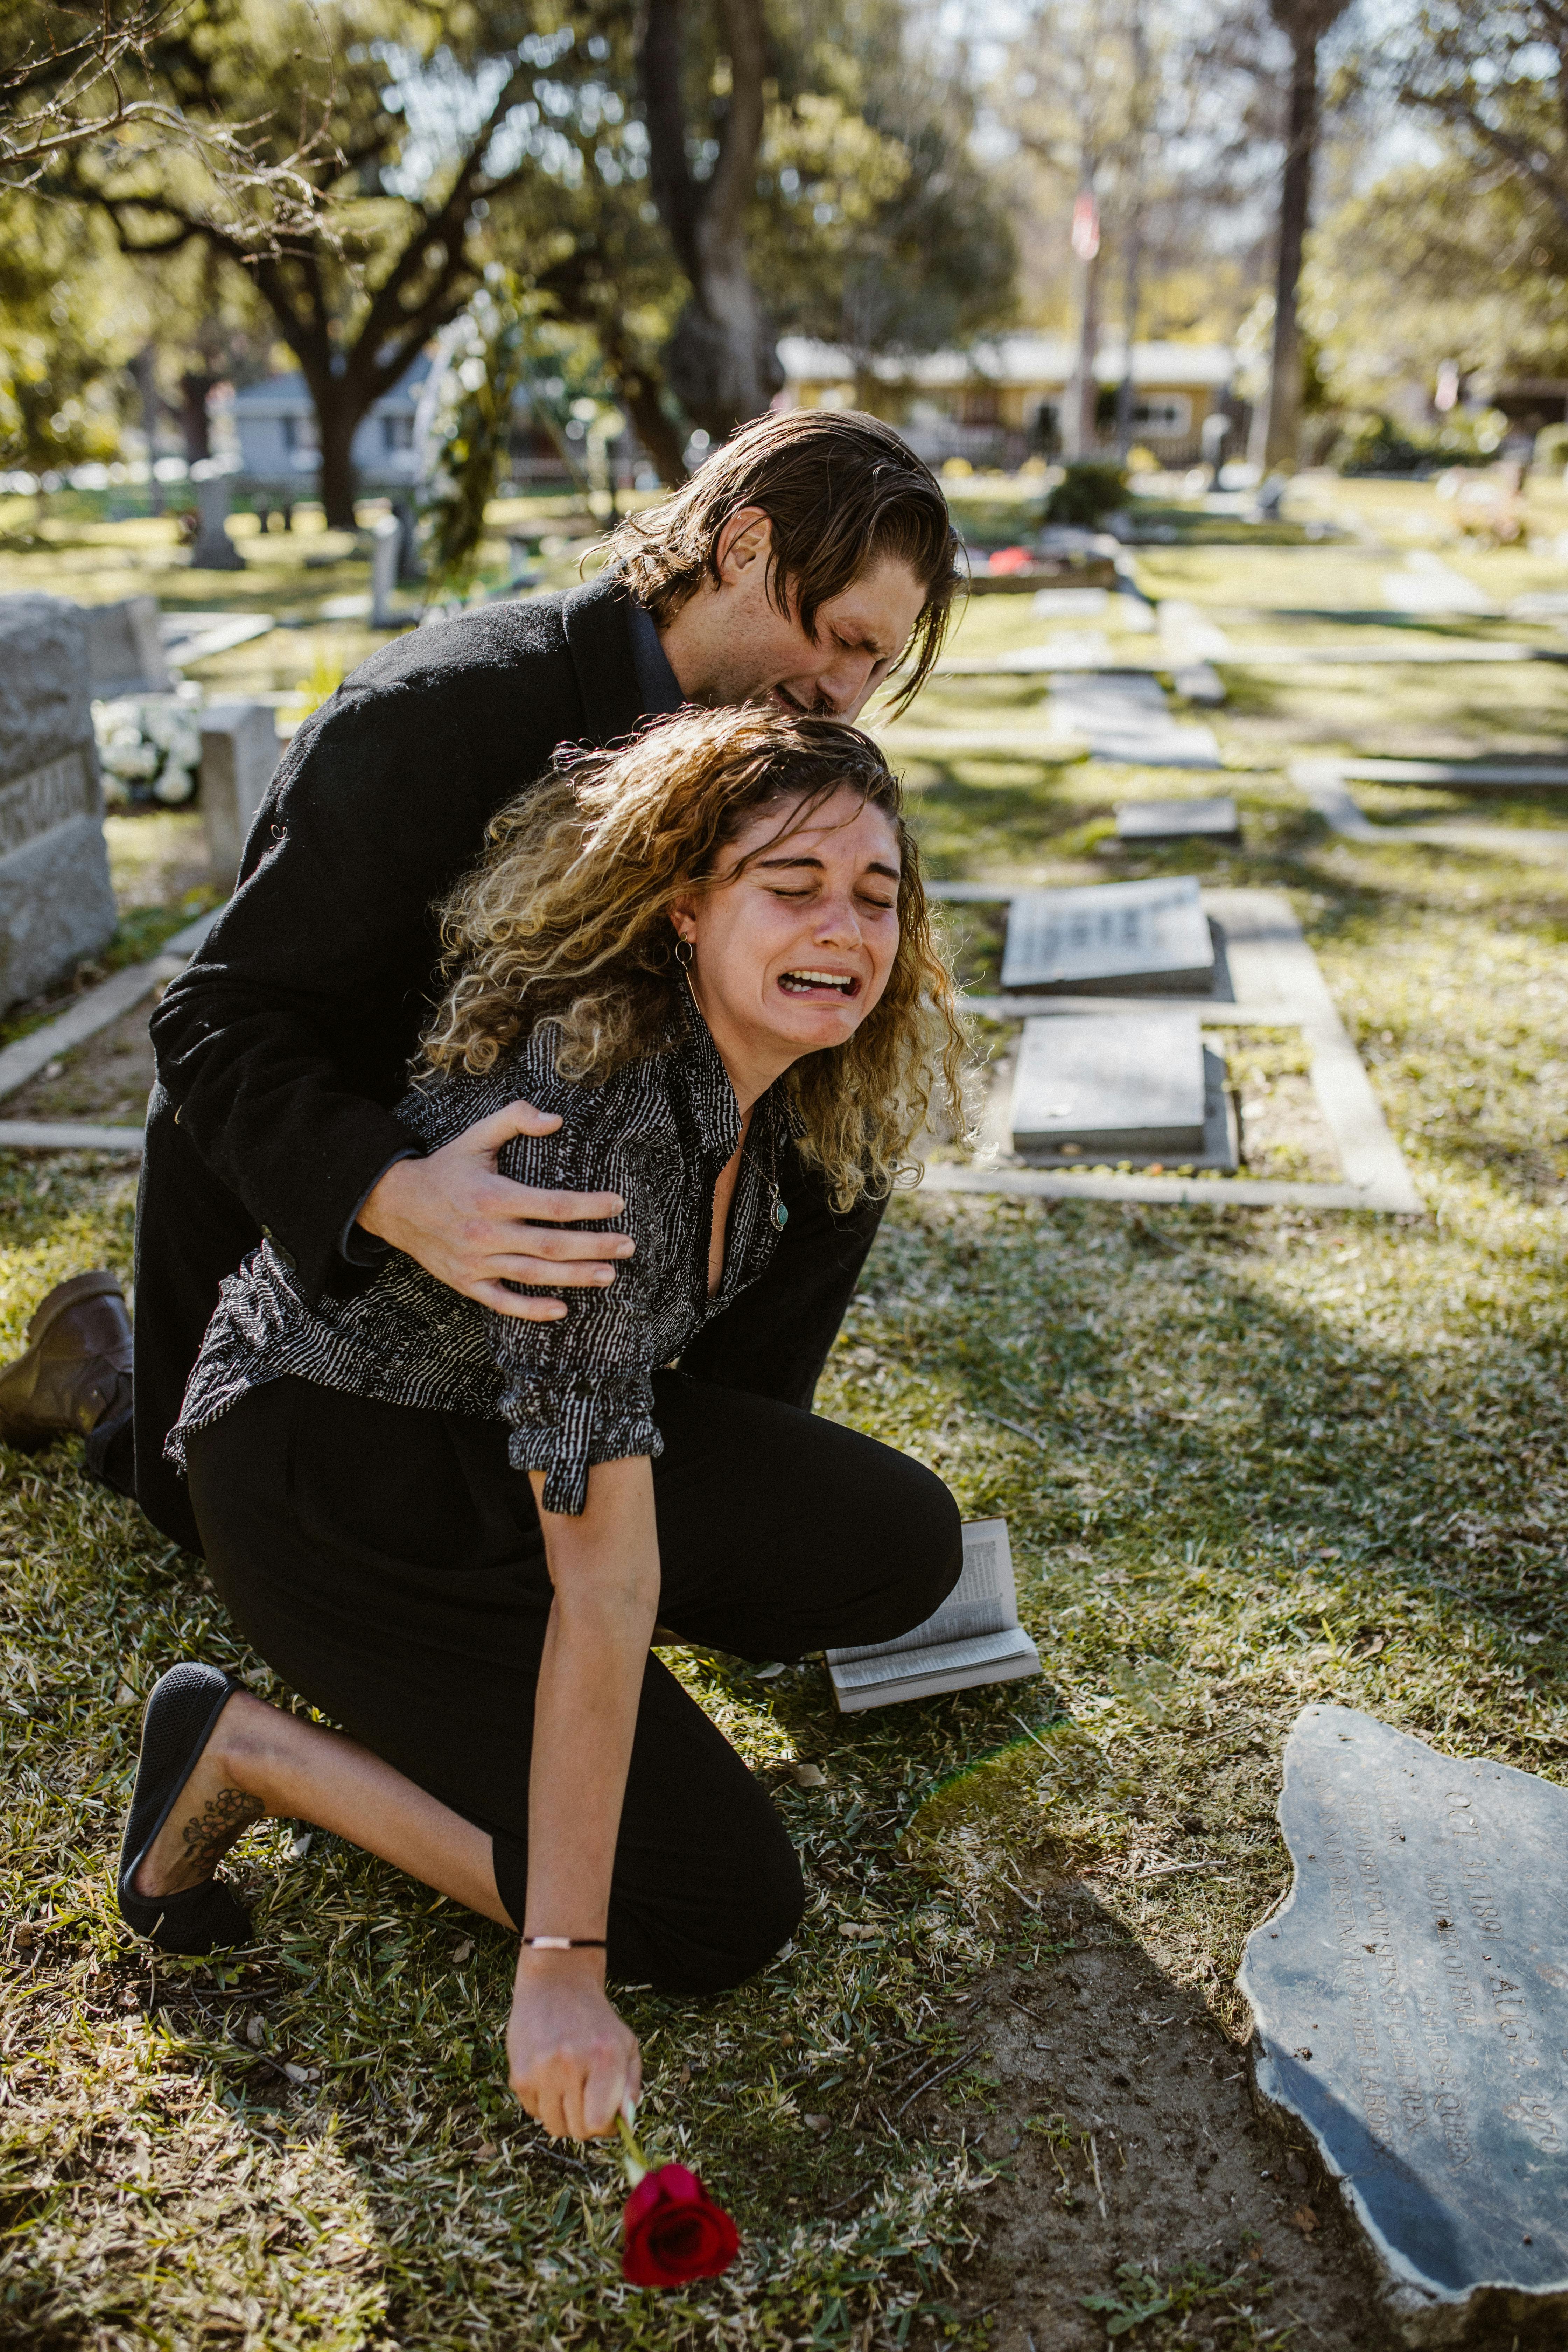 A young woman comforted by a man while crying at a gravesite | Source: Pexels